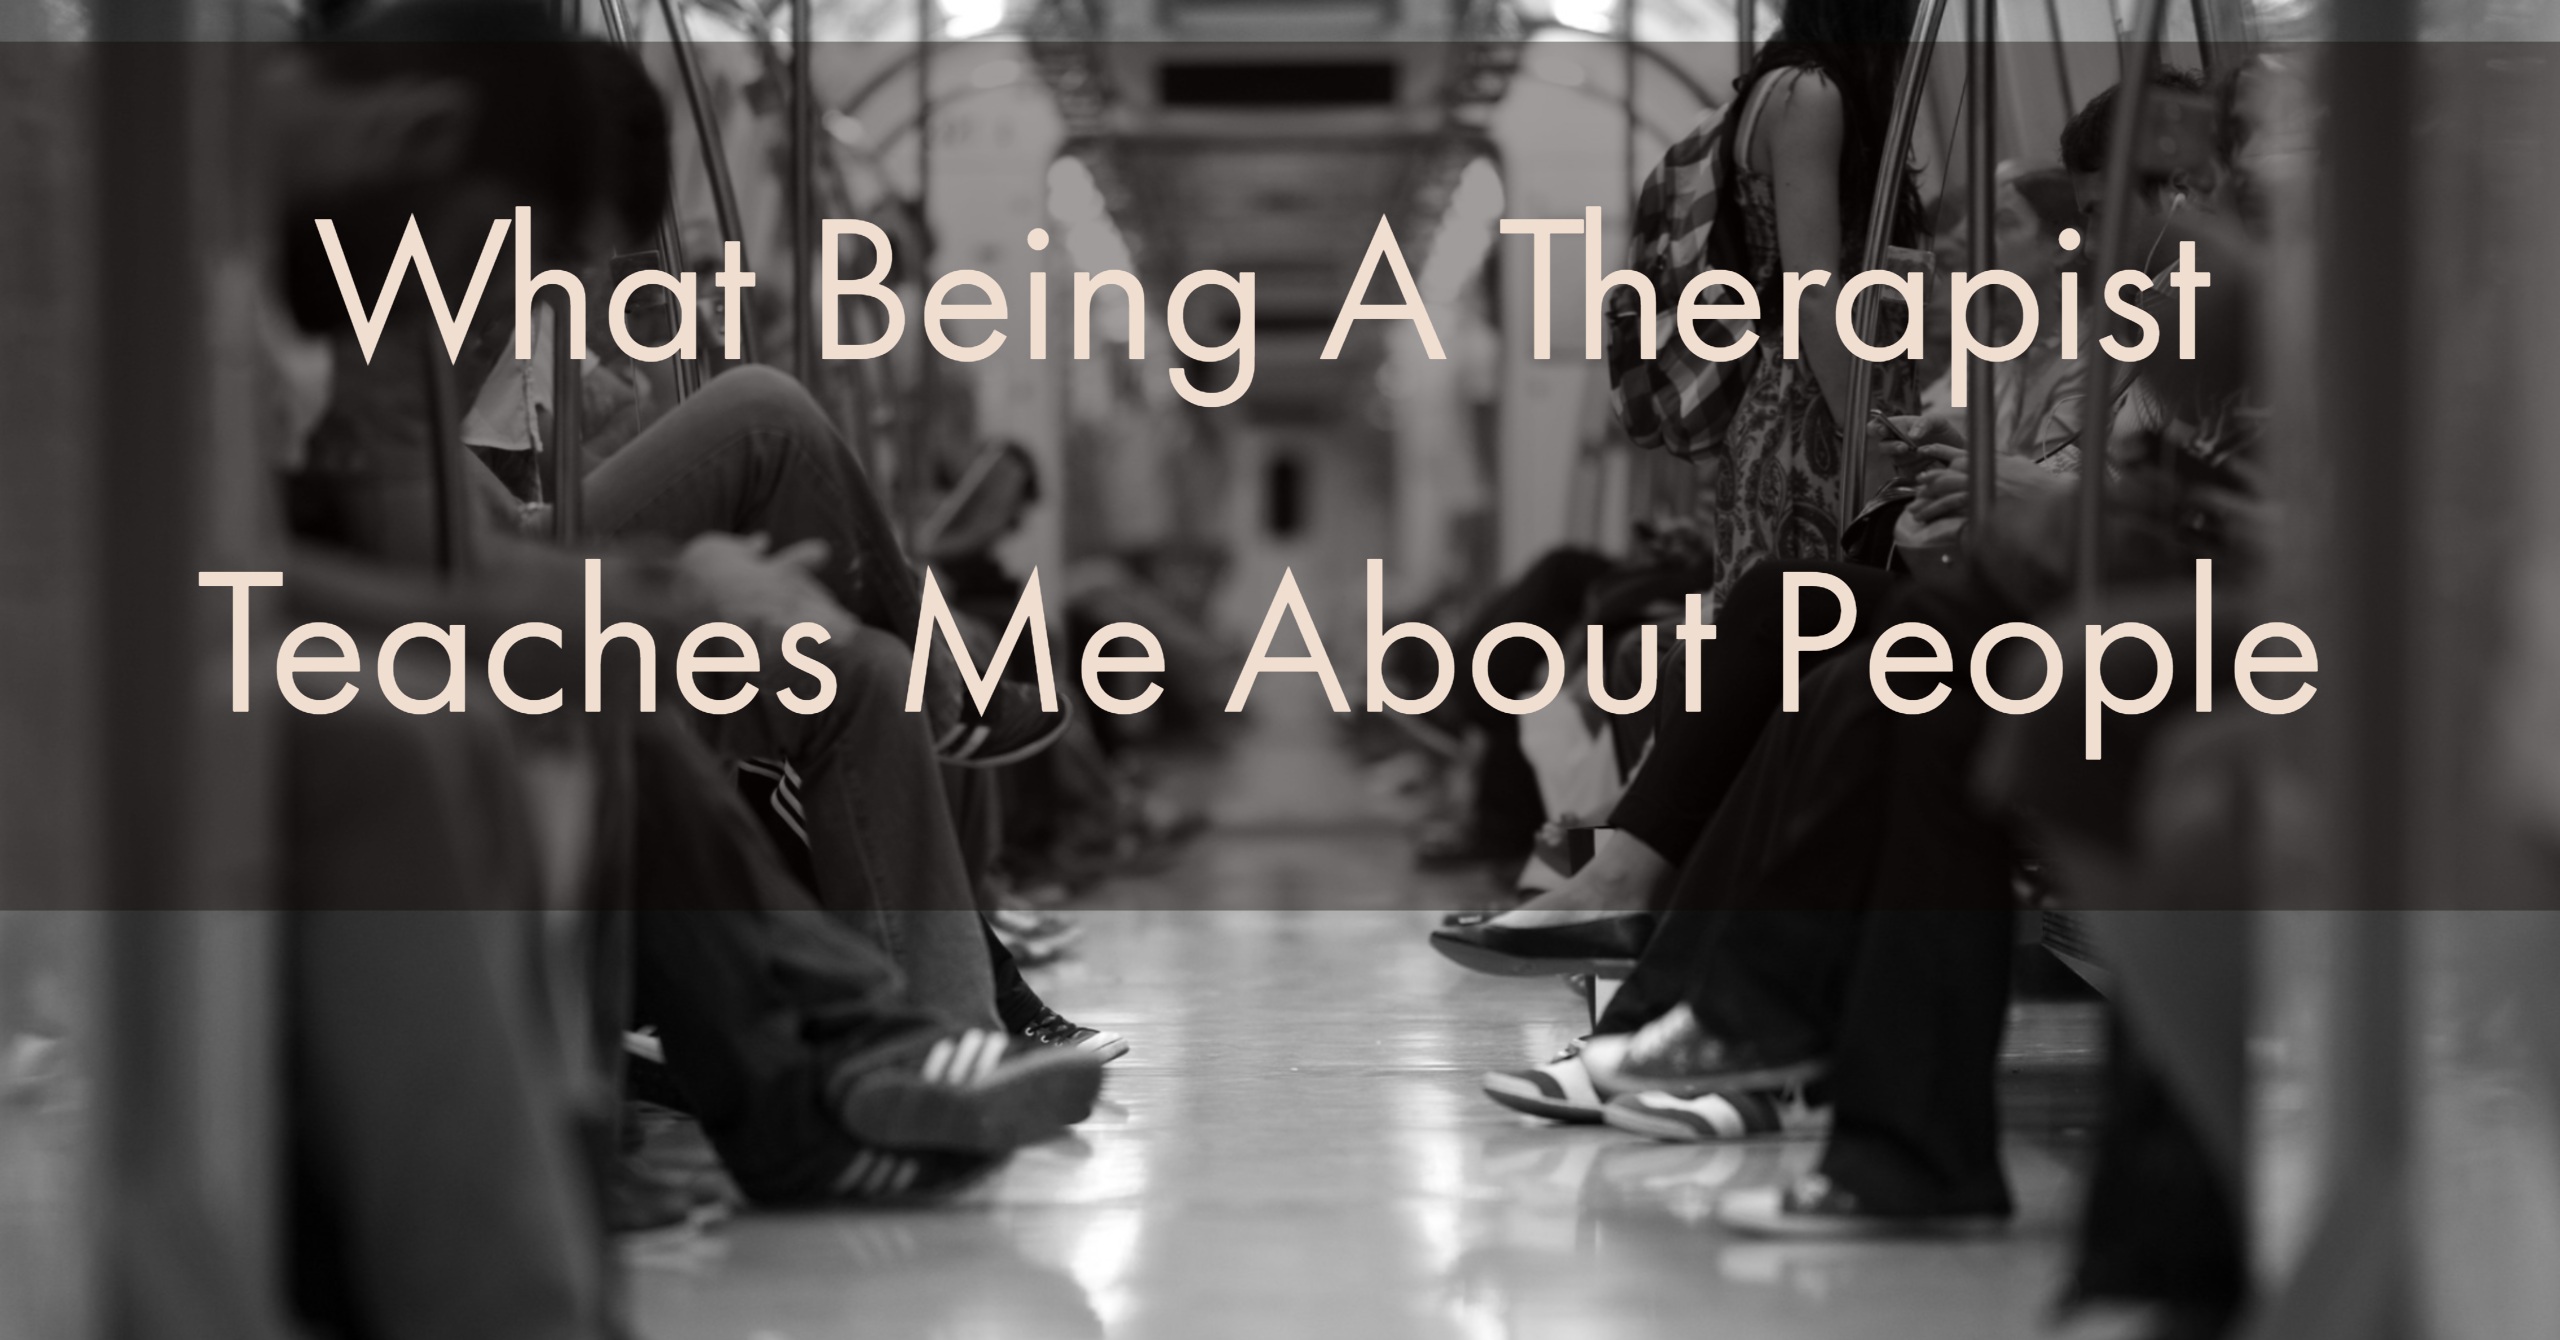 What Being A Therapist Teaches Me About People